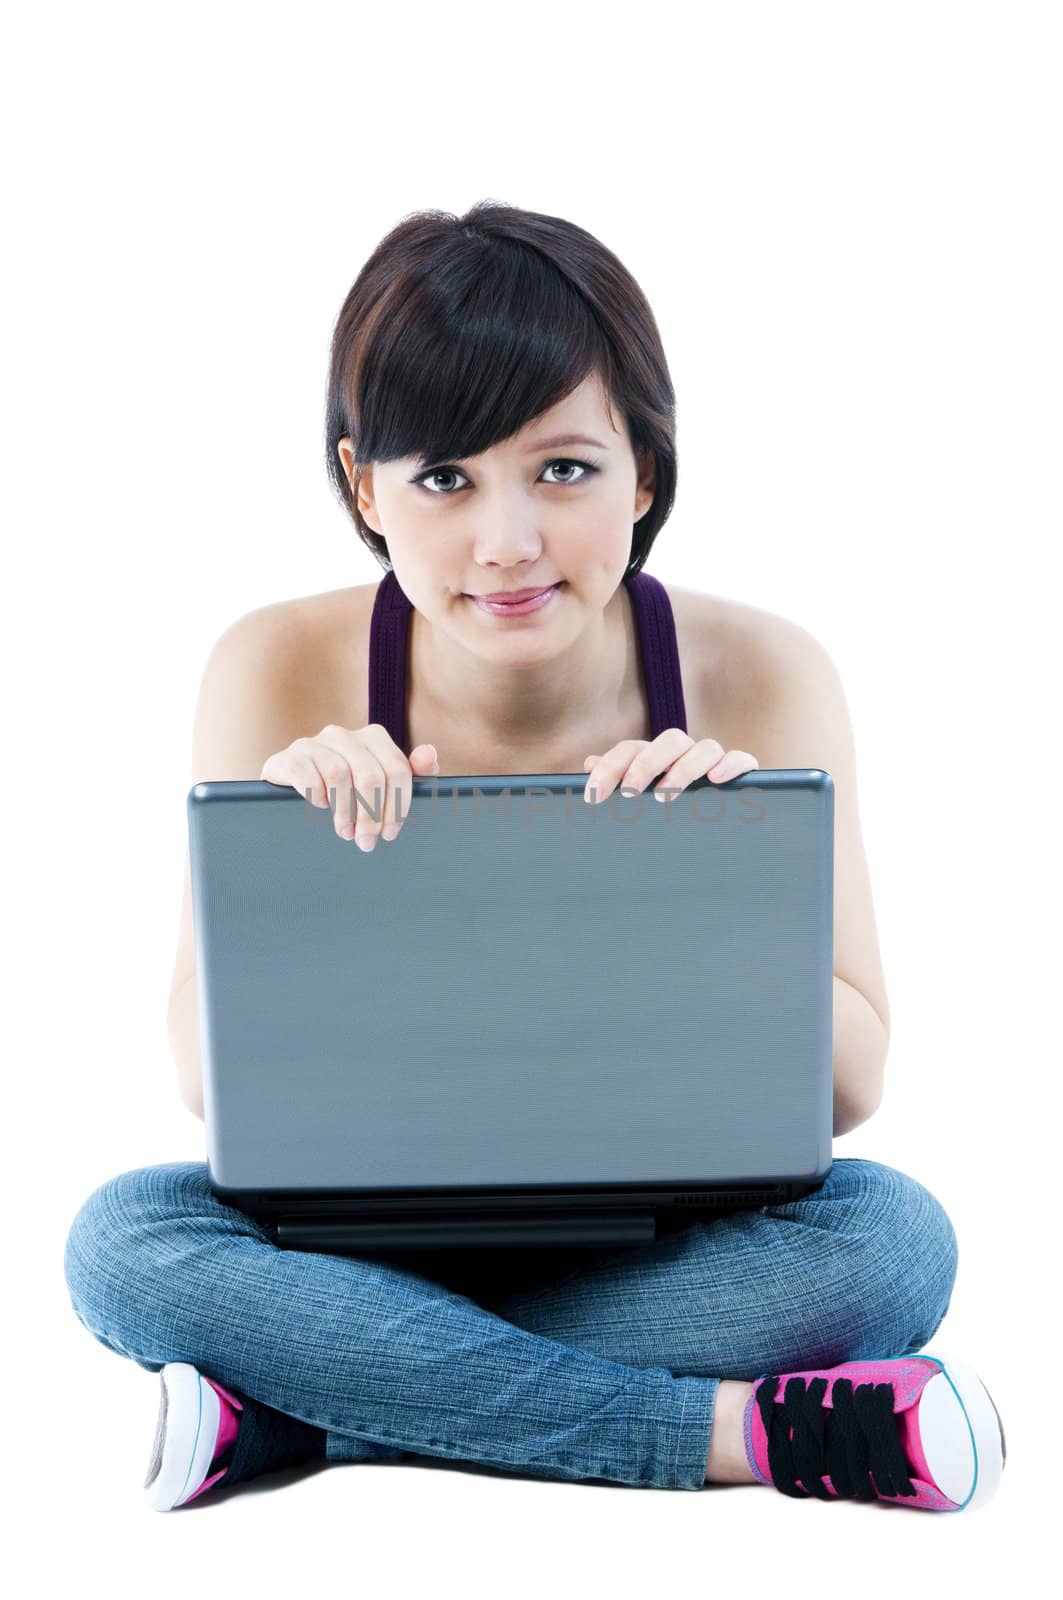 Portrait of a cute young Asian woman sitting on floor with laptop over white background.